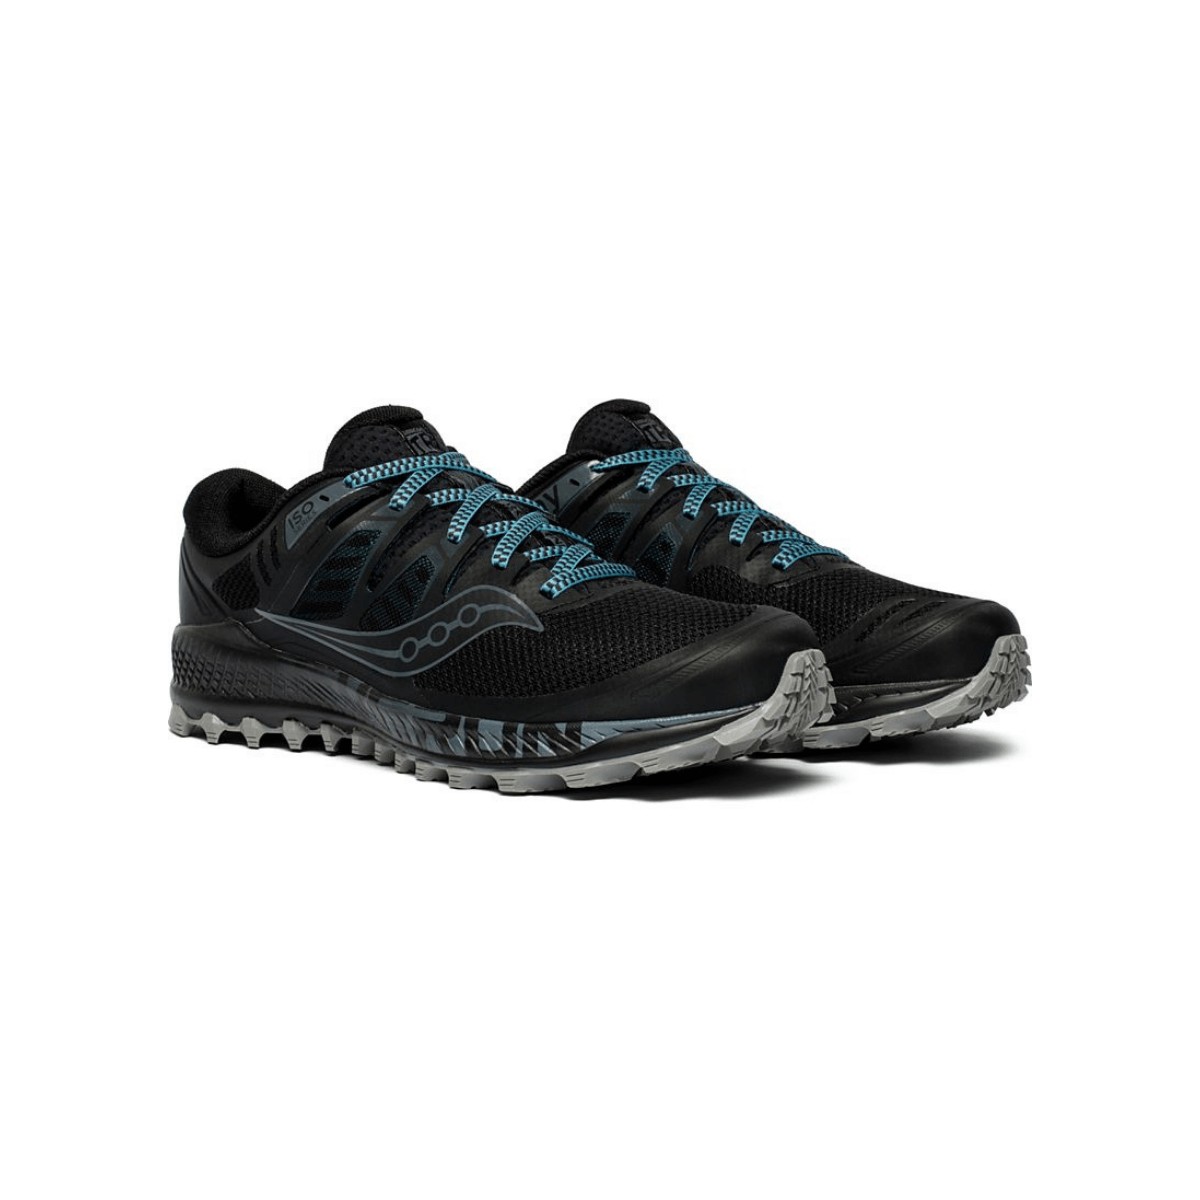 Trail Saucony Peregrine ISO Black Grey AW19 Men's Running Shoes